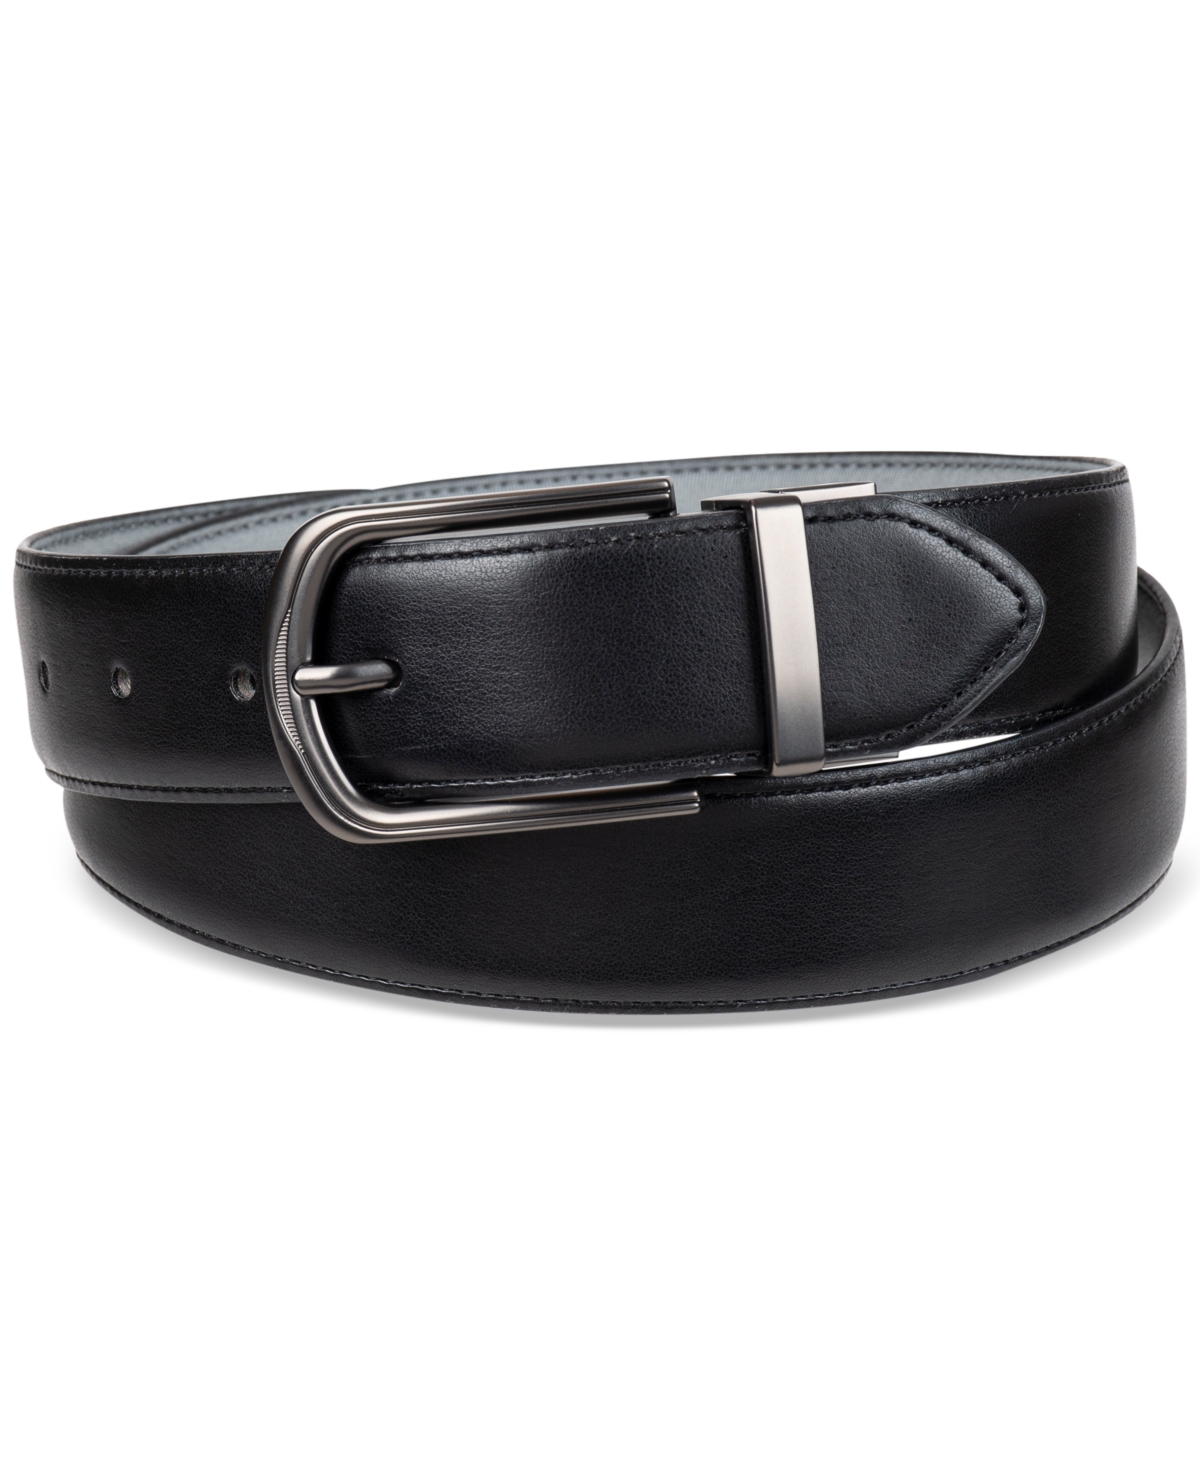 Men's Reversible Faux-Leather Casual Belt, Created for Macy's - Black/grey